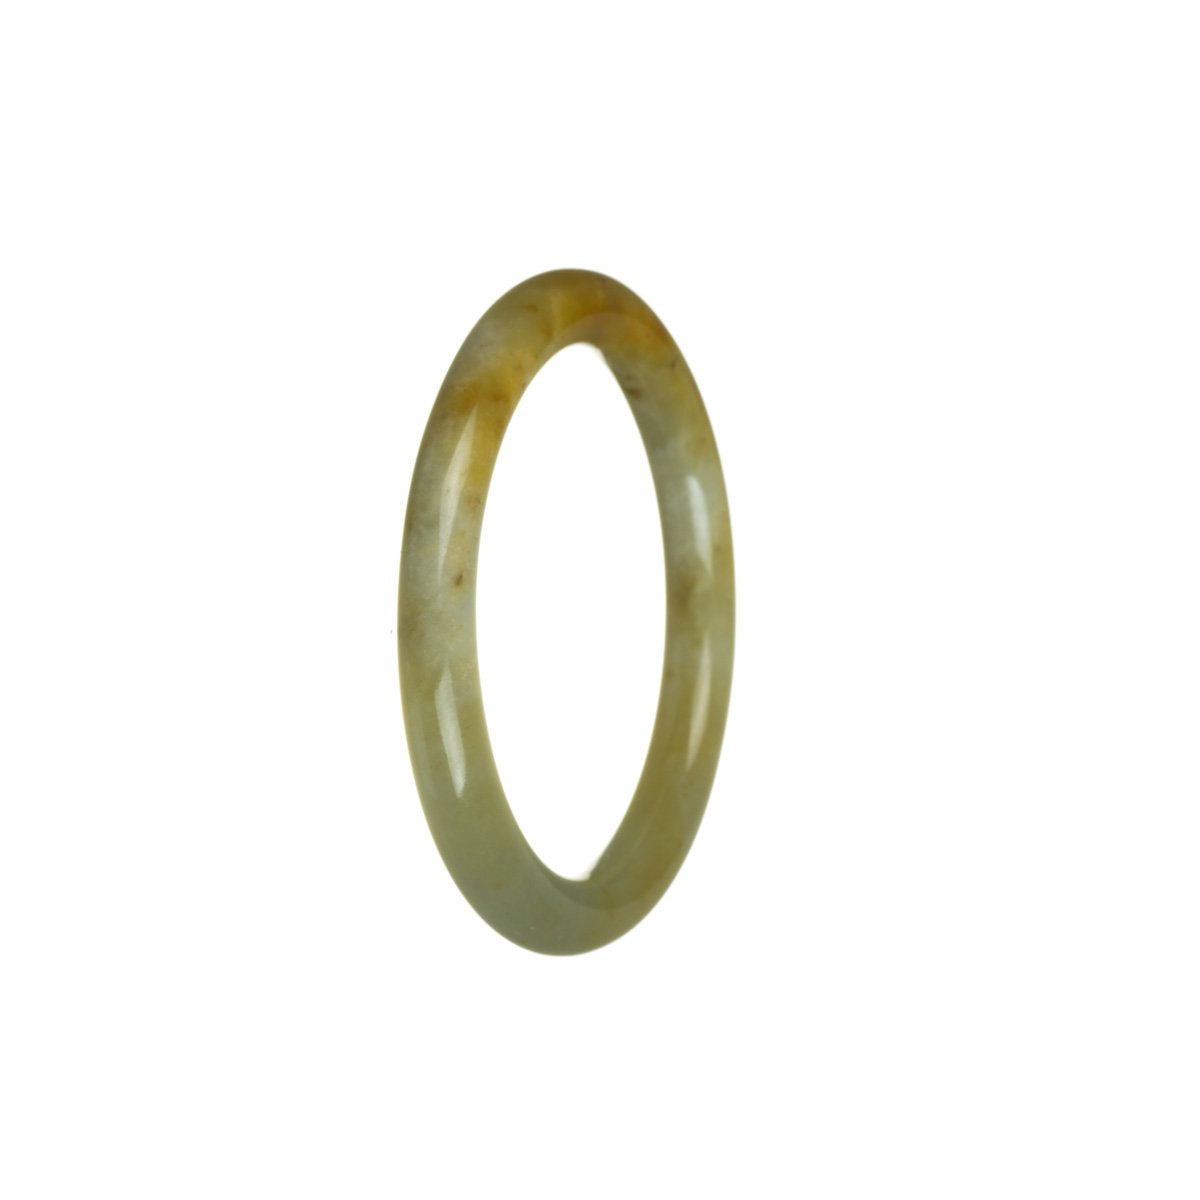 Authentic Natural Brown with Light Green Jadeite Jade Bangle Bracelet - 50mm Oval